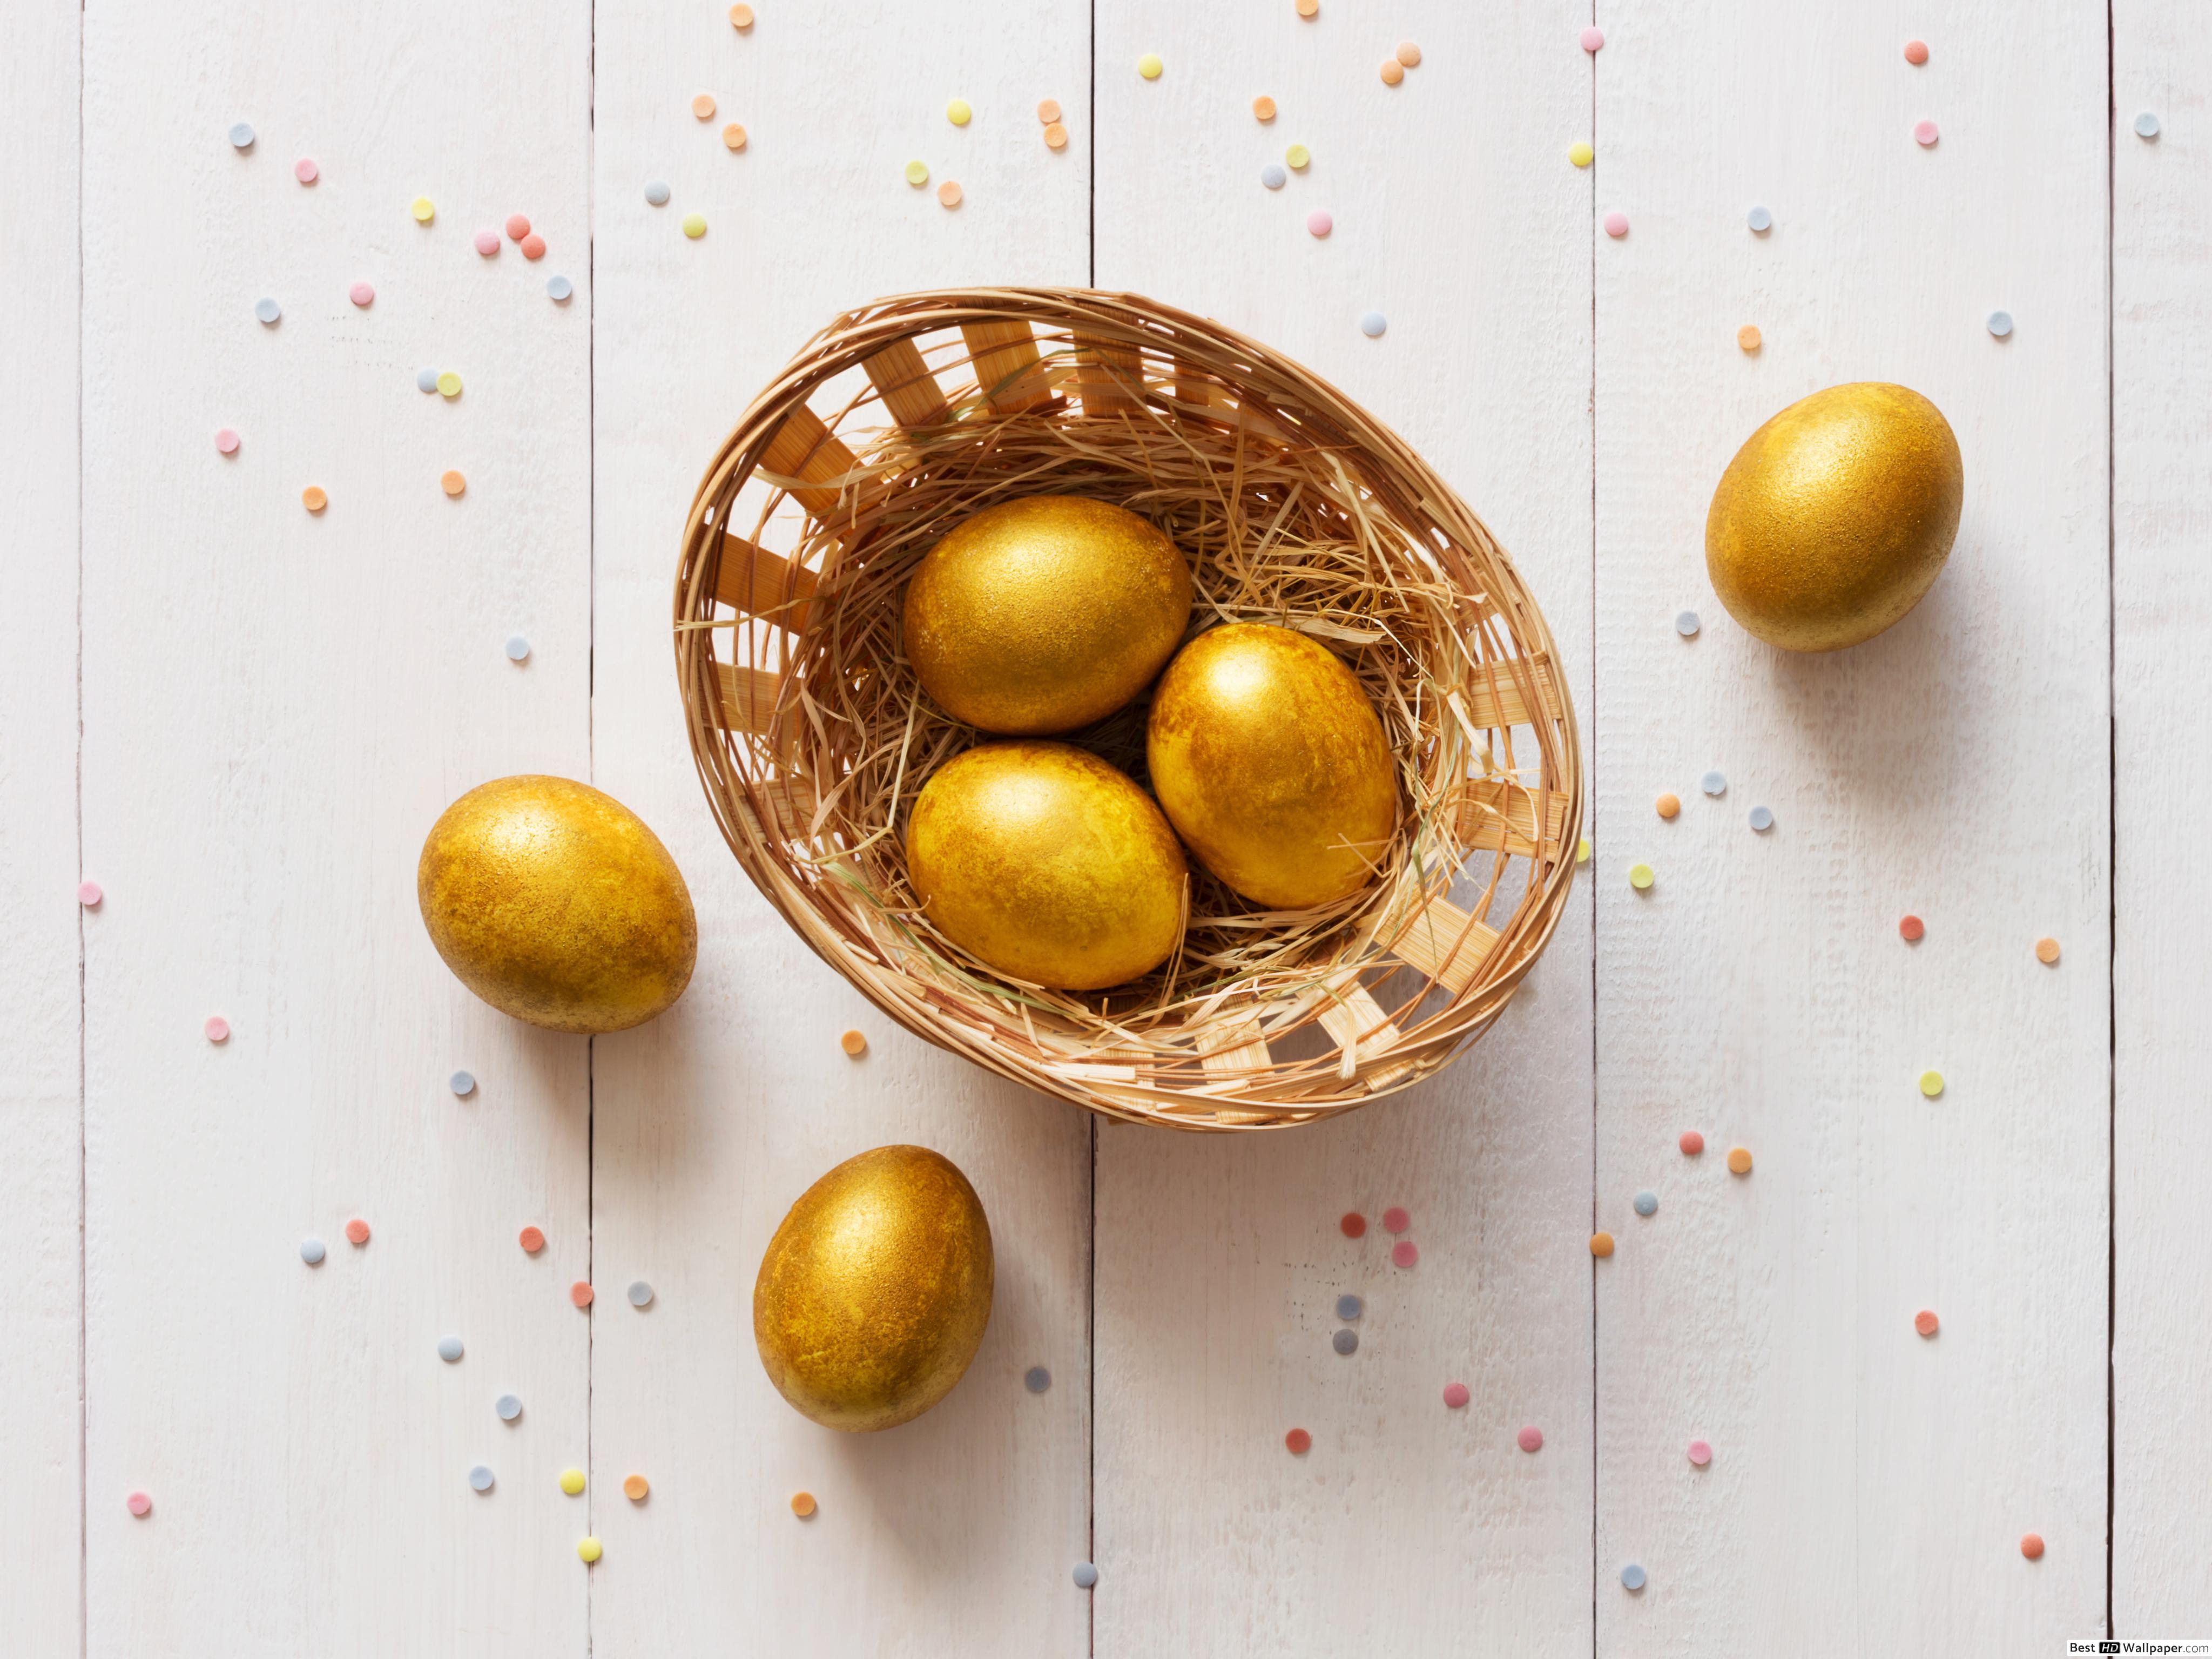 Gold Easter Egg Hd Transparent, Gold And Silver Easter Eggs For Day, Easter  Clipart, Easter, Egg PNG Image For Free Download